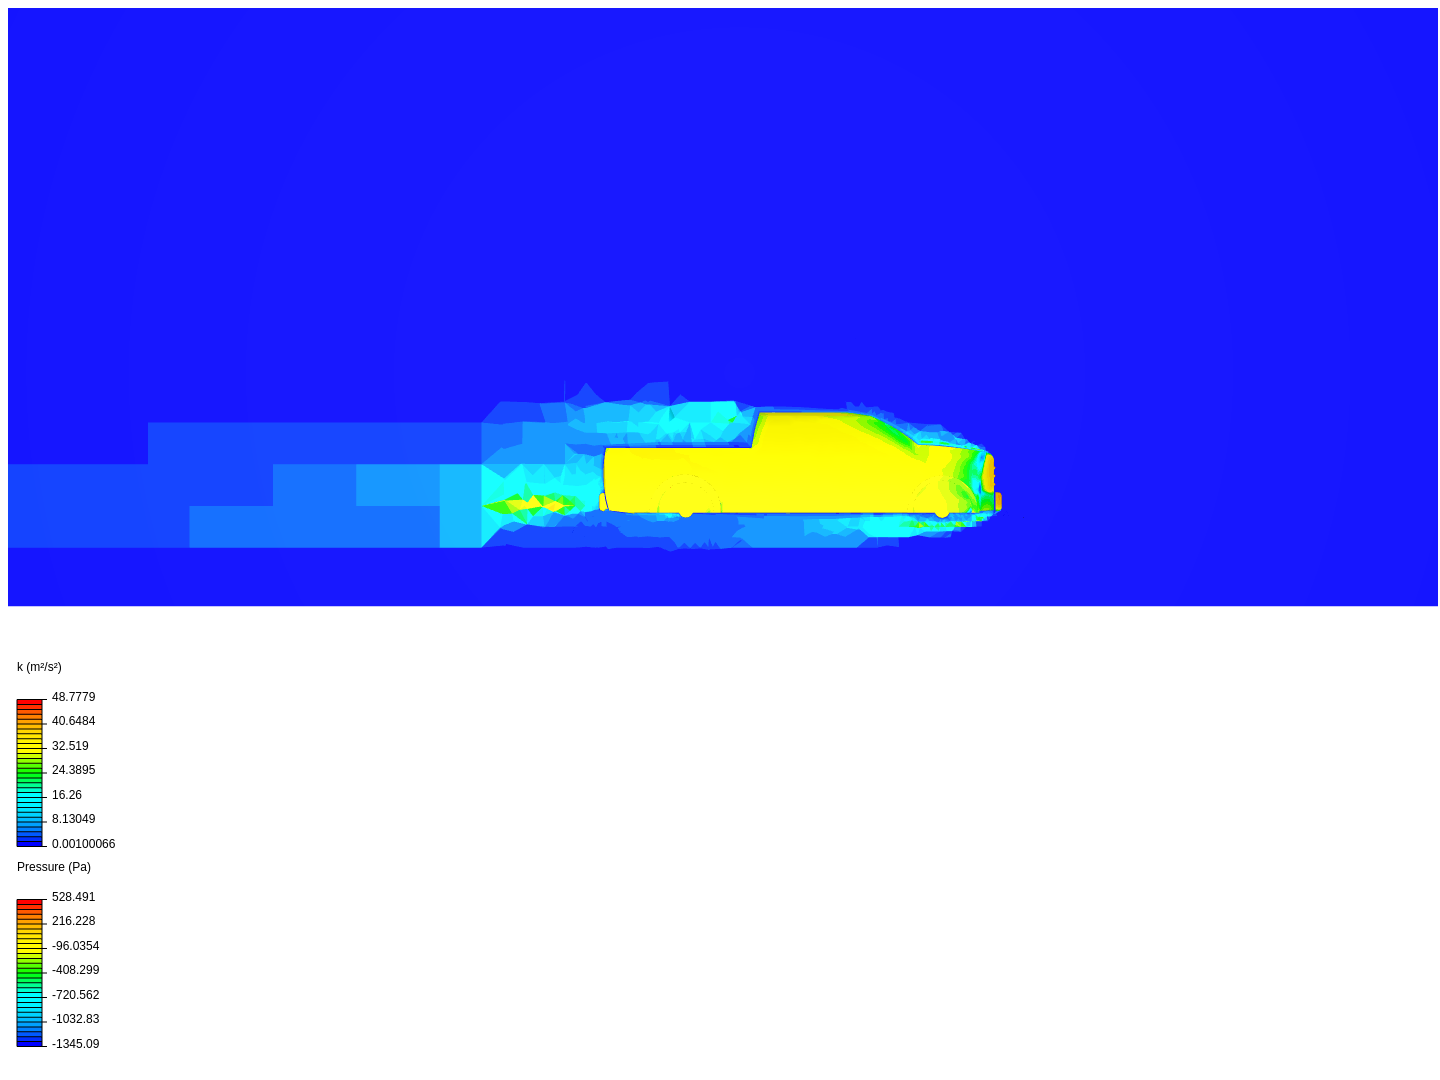 ford f 150 fluid flow analysis image